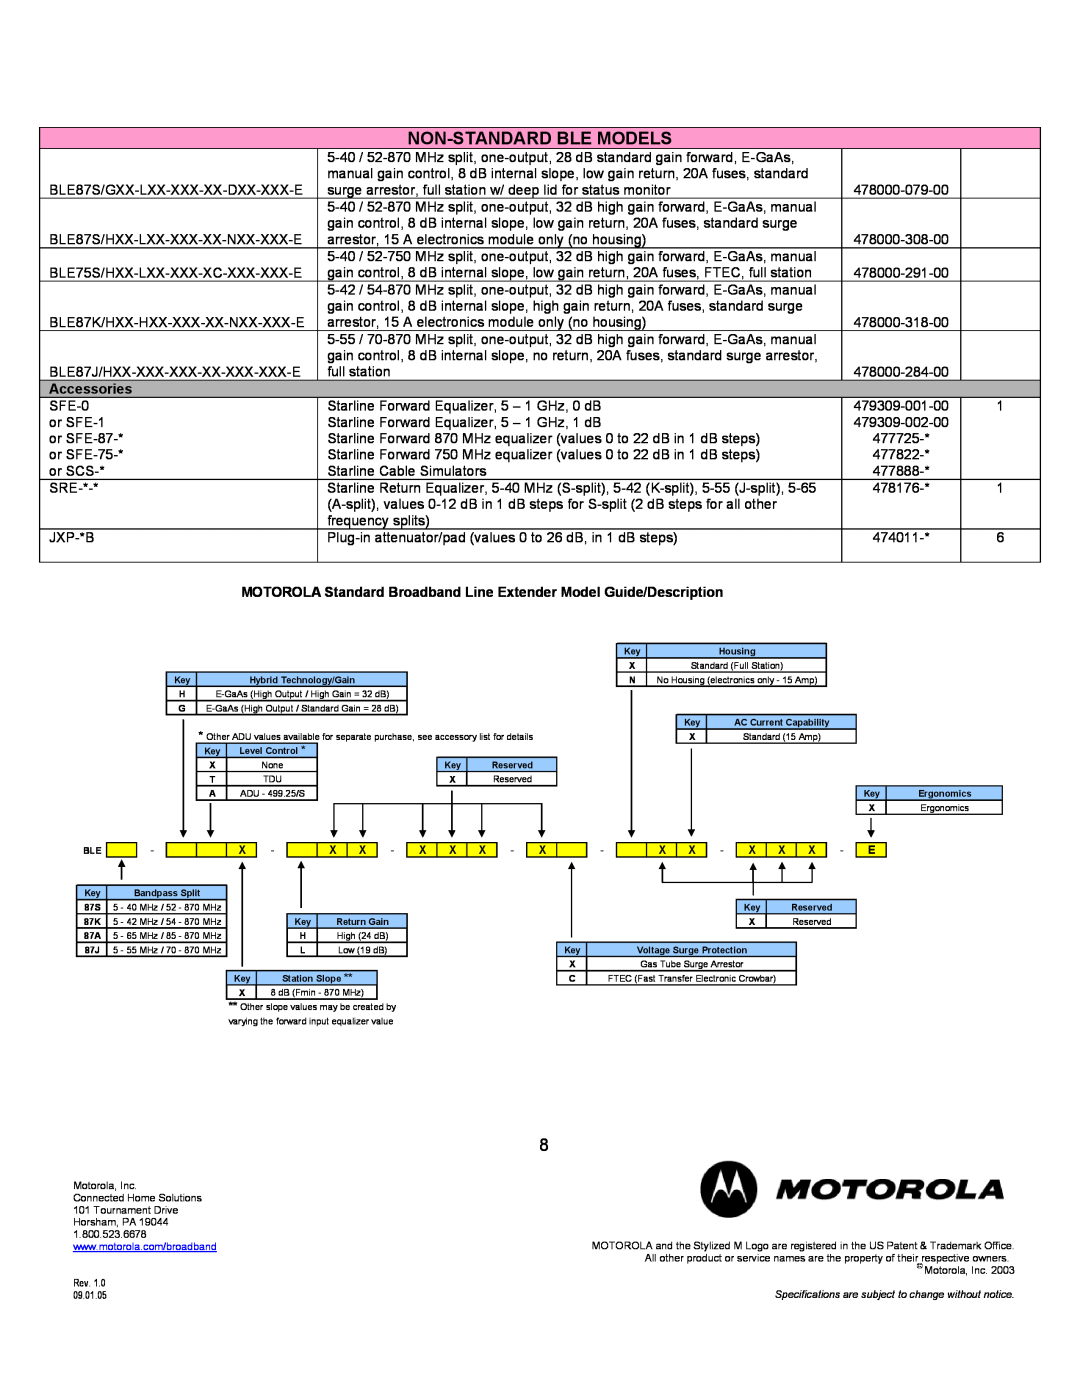 Motorola BLE87 specifications Non-Standard Ble Models, Accessories 